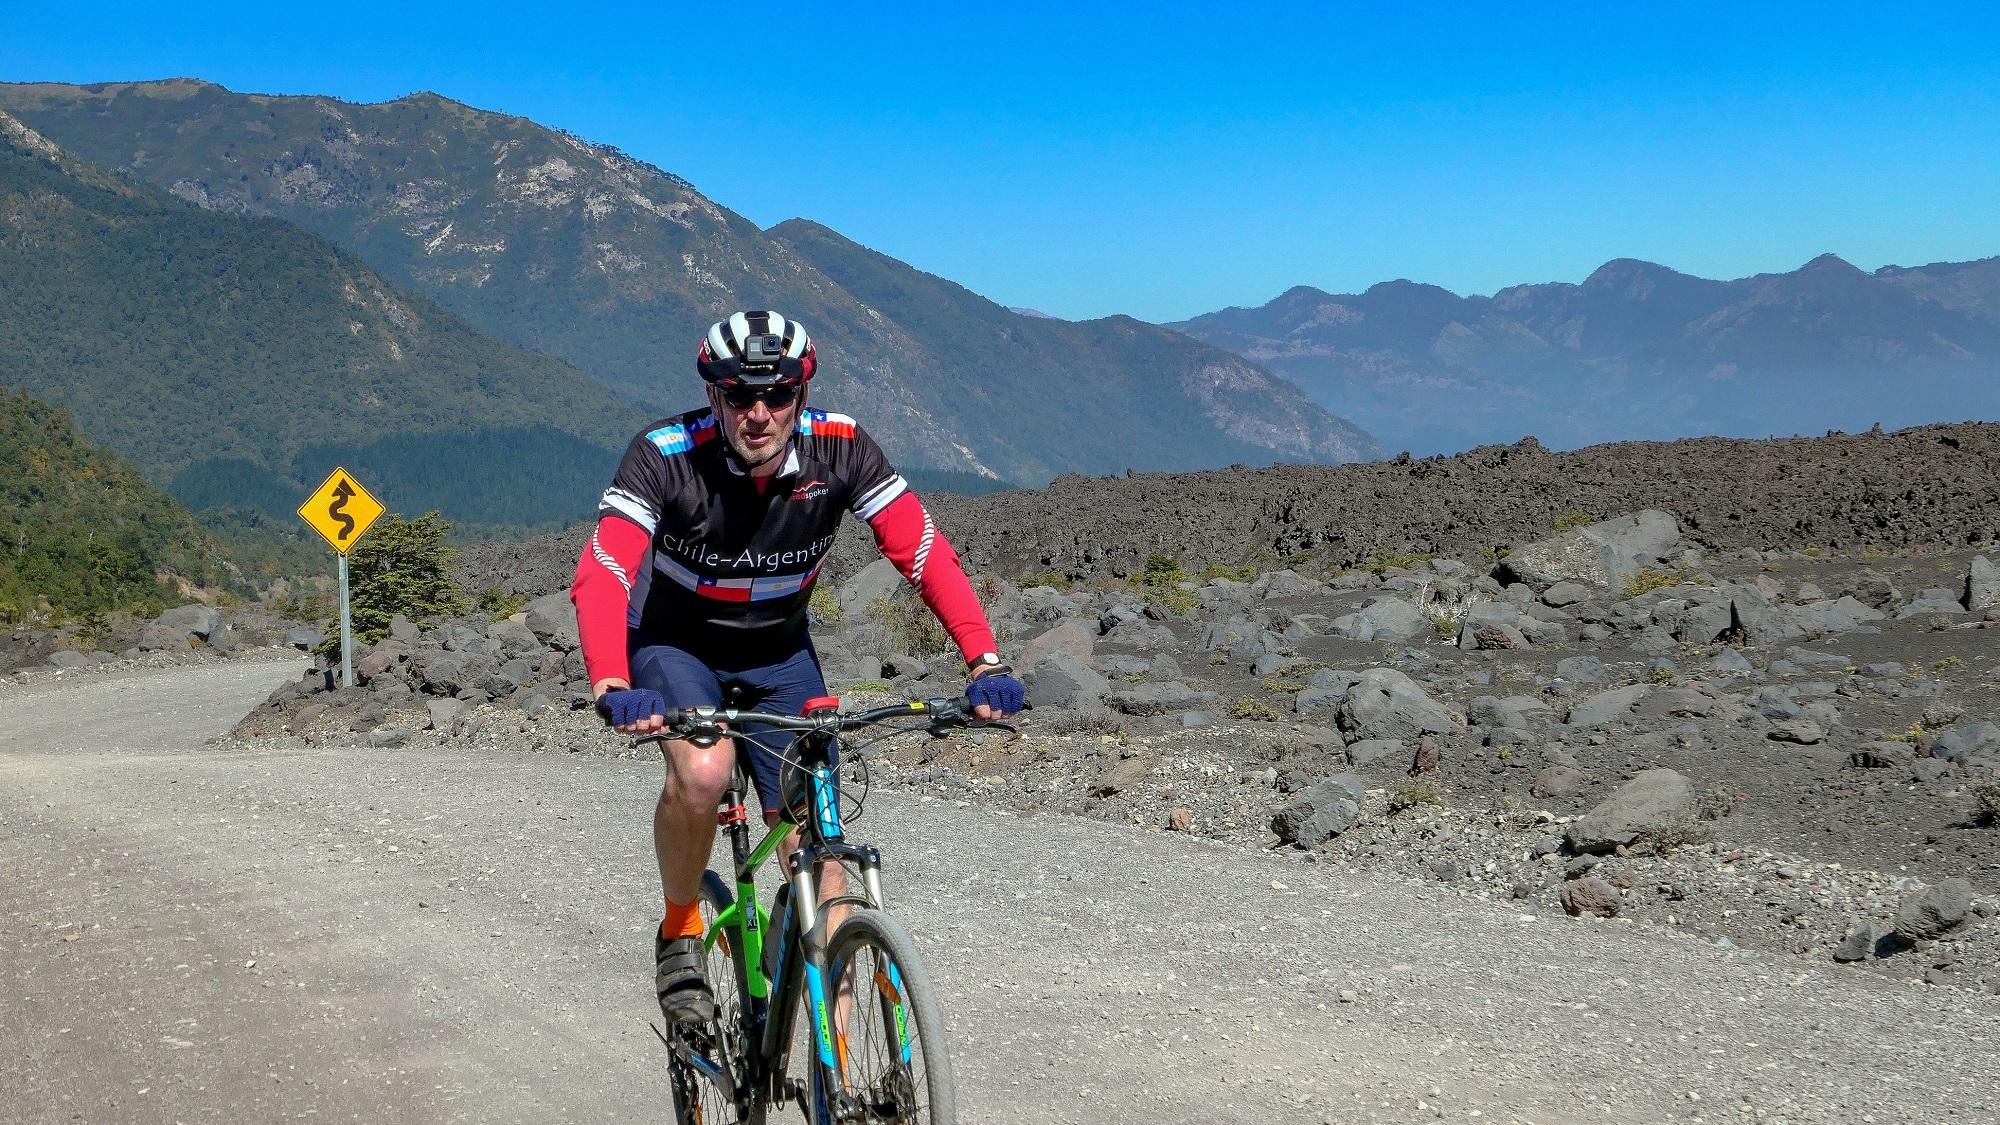 Cycling Tours Chile - Argentina